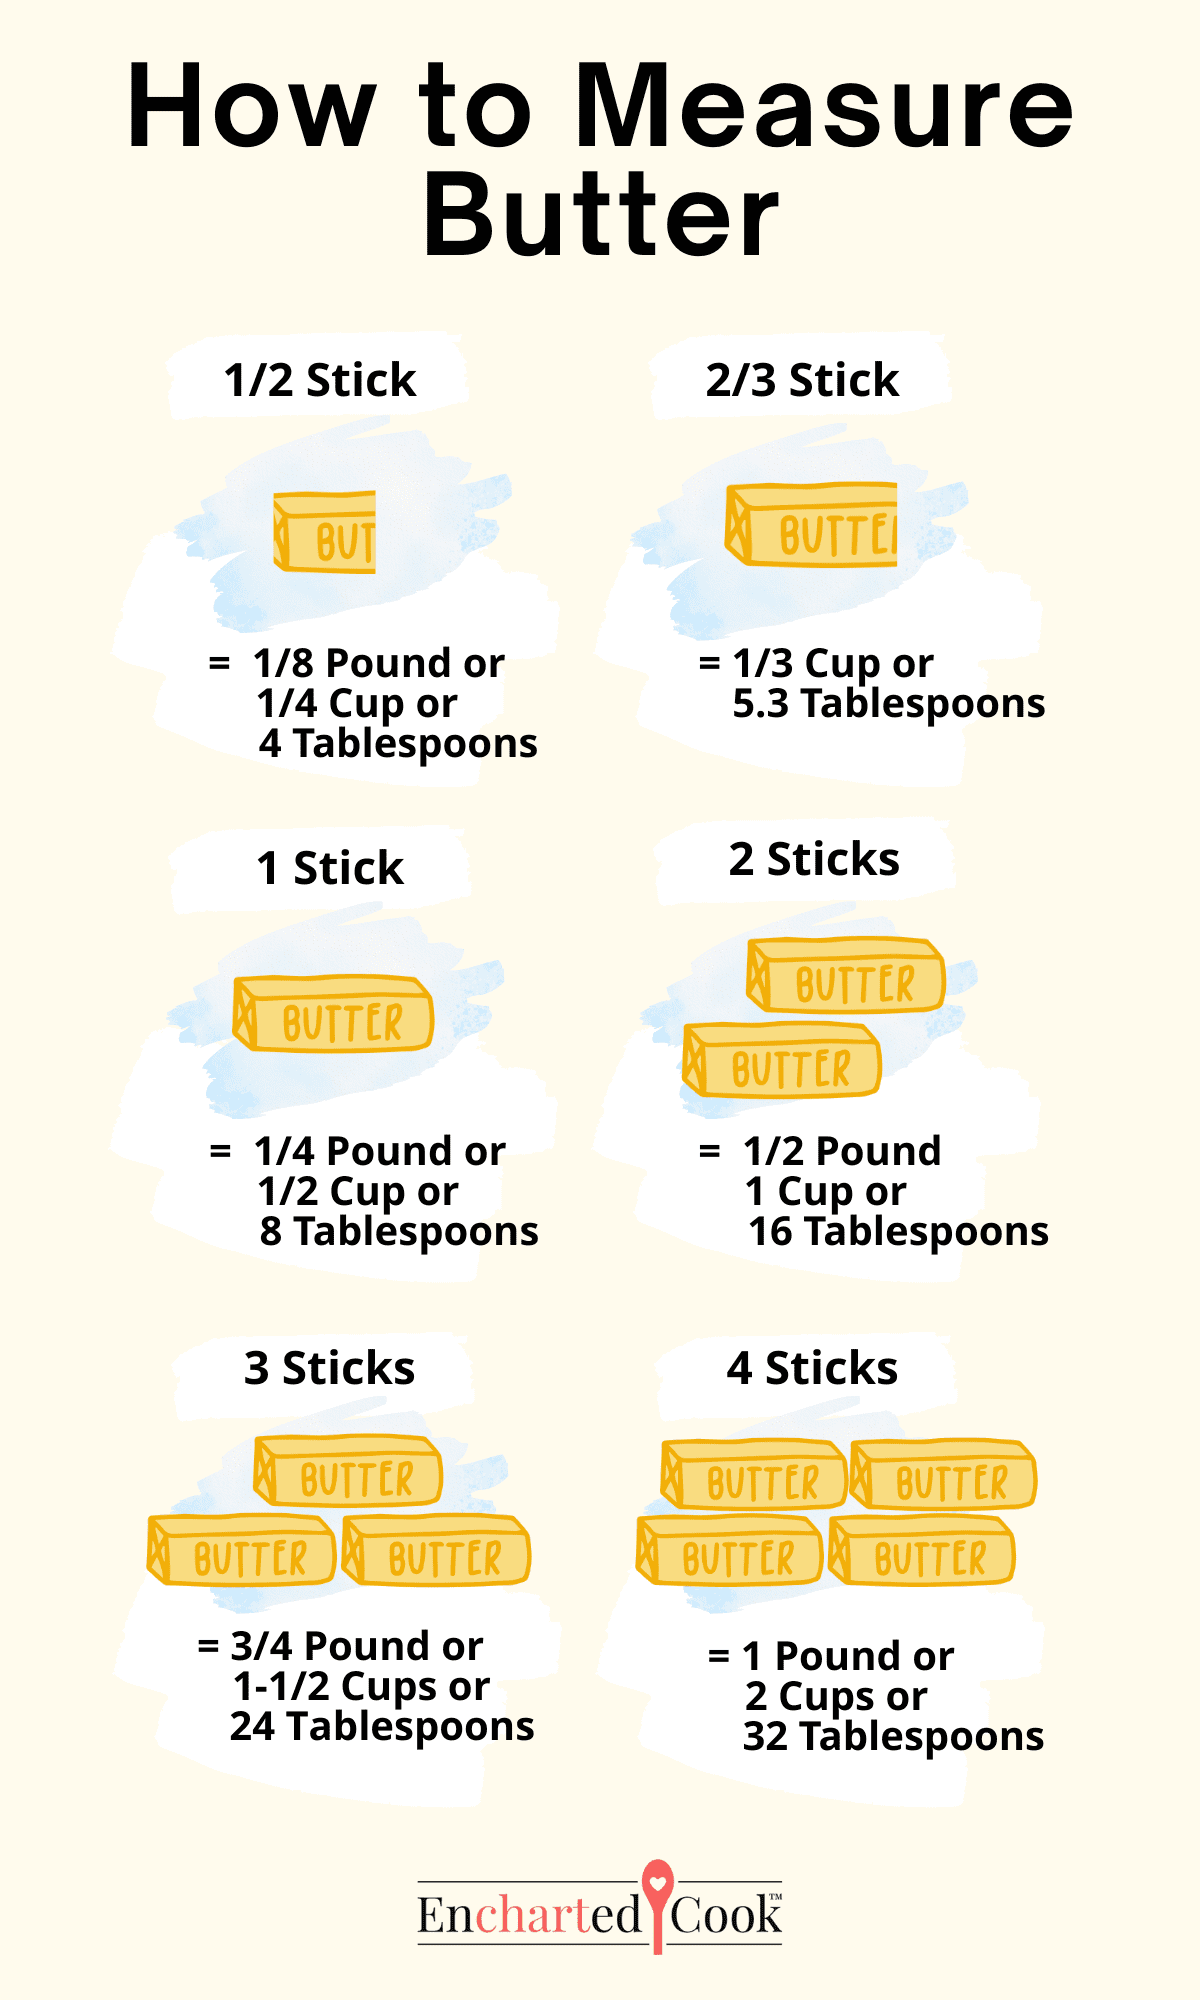 A graphic showing how to measure butter by the number of sticks or a fractional portion of sticks.